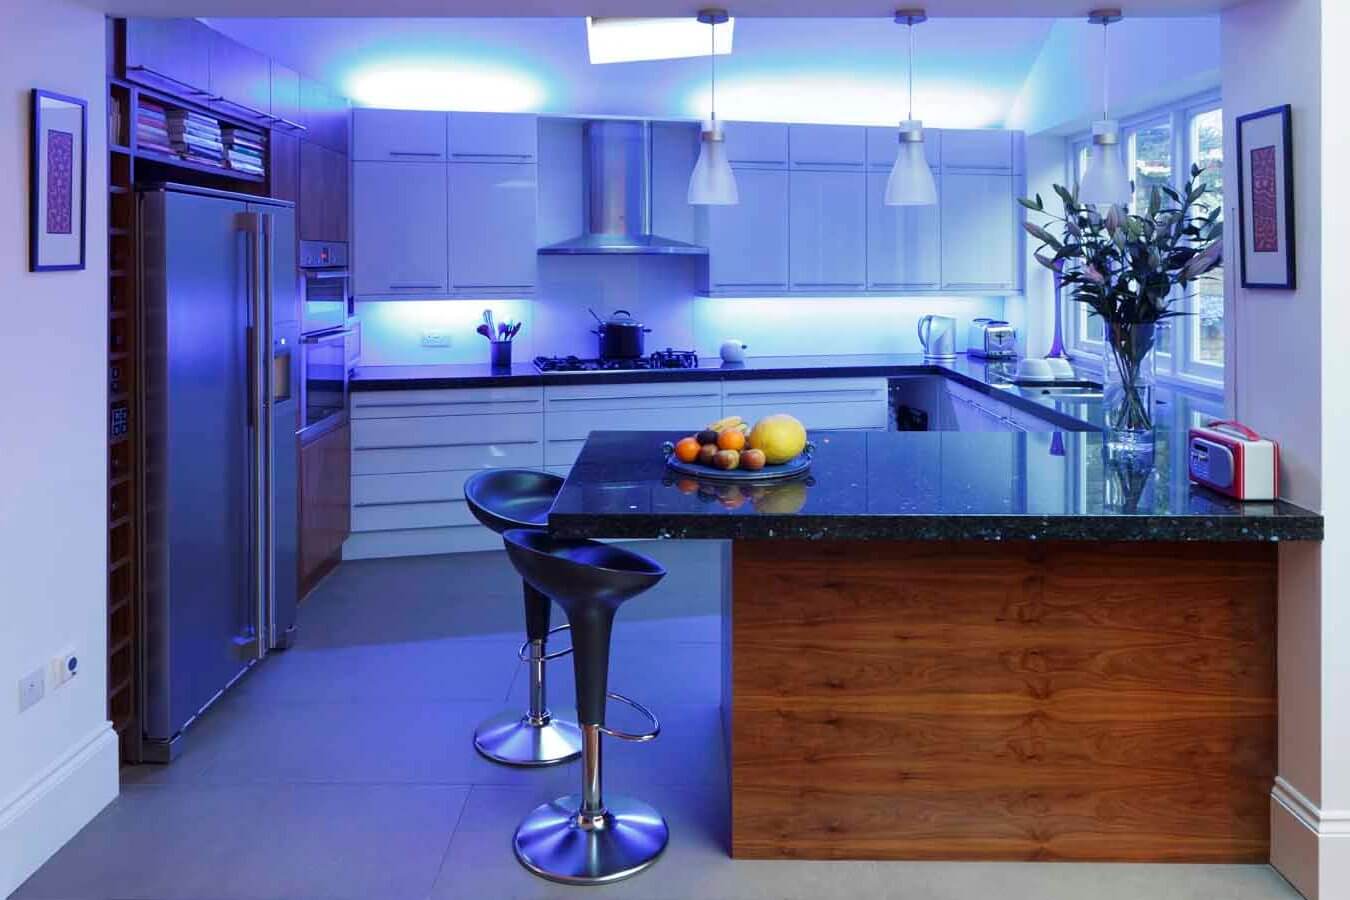 Dramatic LED lighting for the kitchen